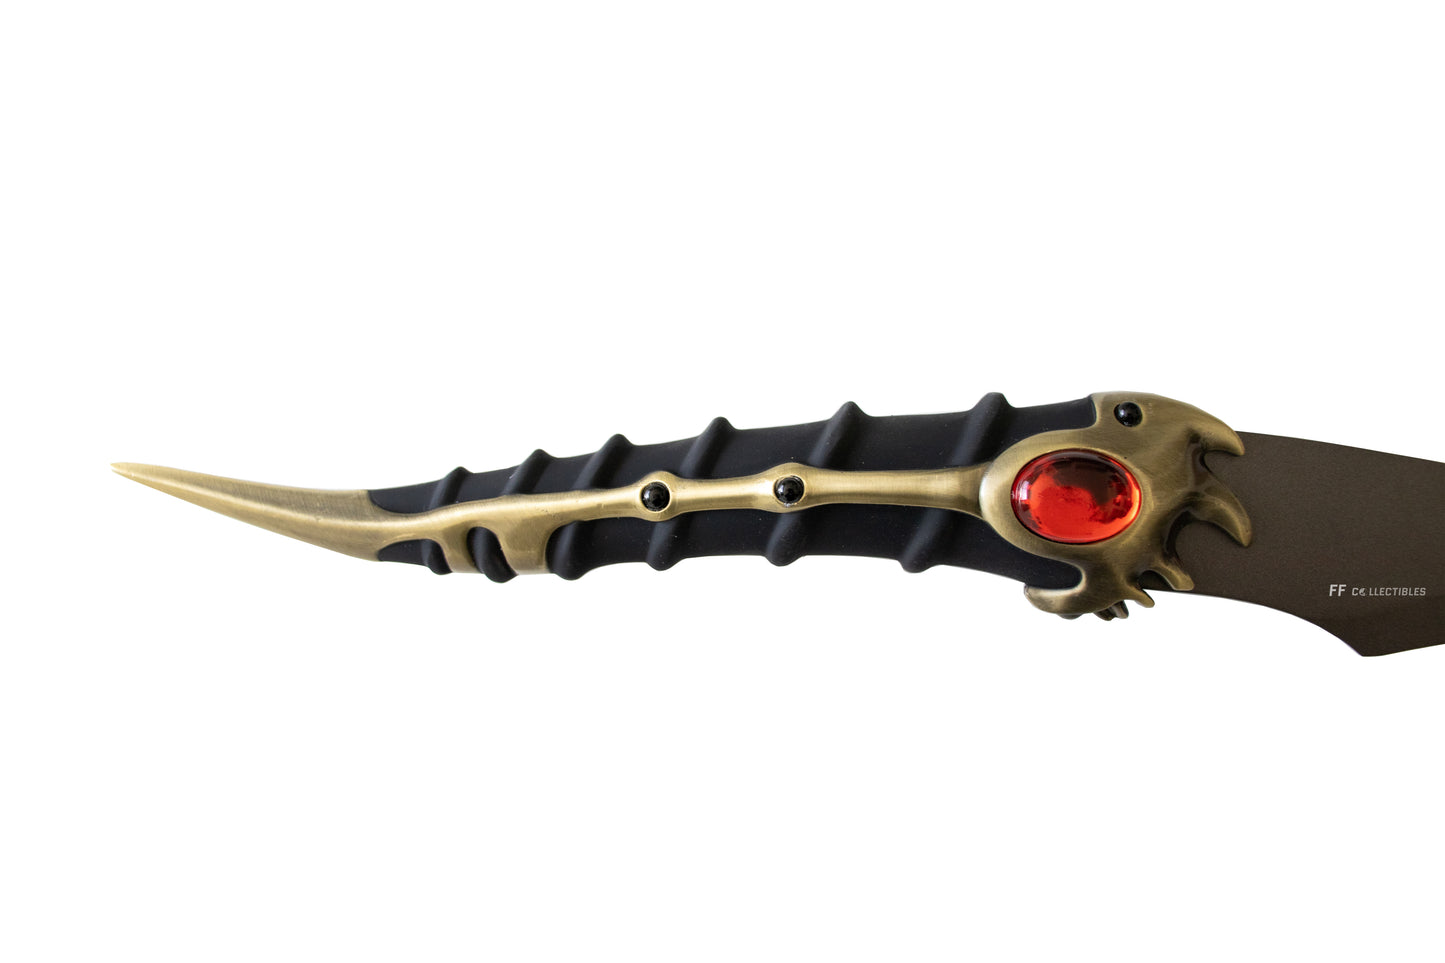 GAME OF THRONES - CATSPAW DAGGER, ARYA STARK'S DAGGER (with FREE wall plaque)